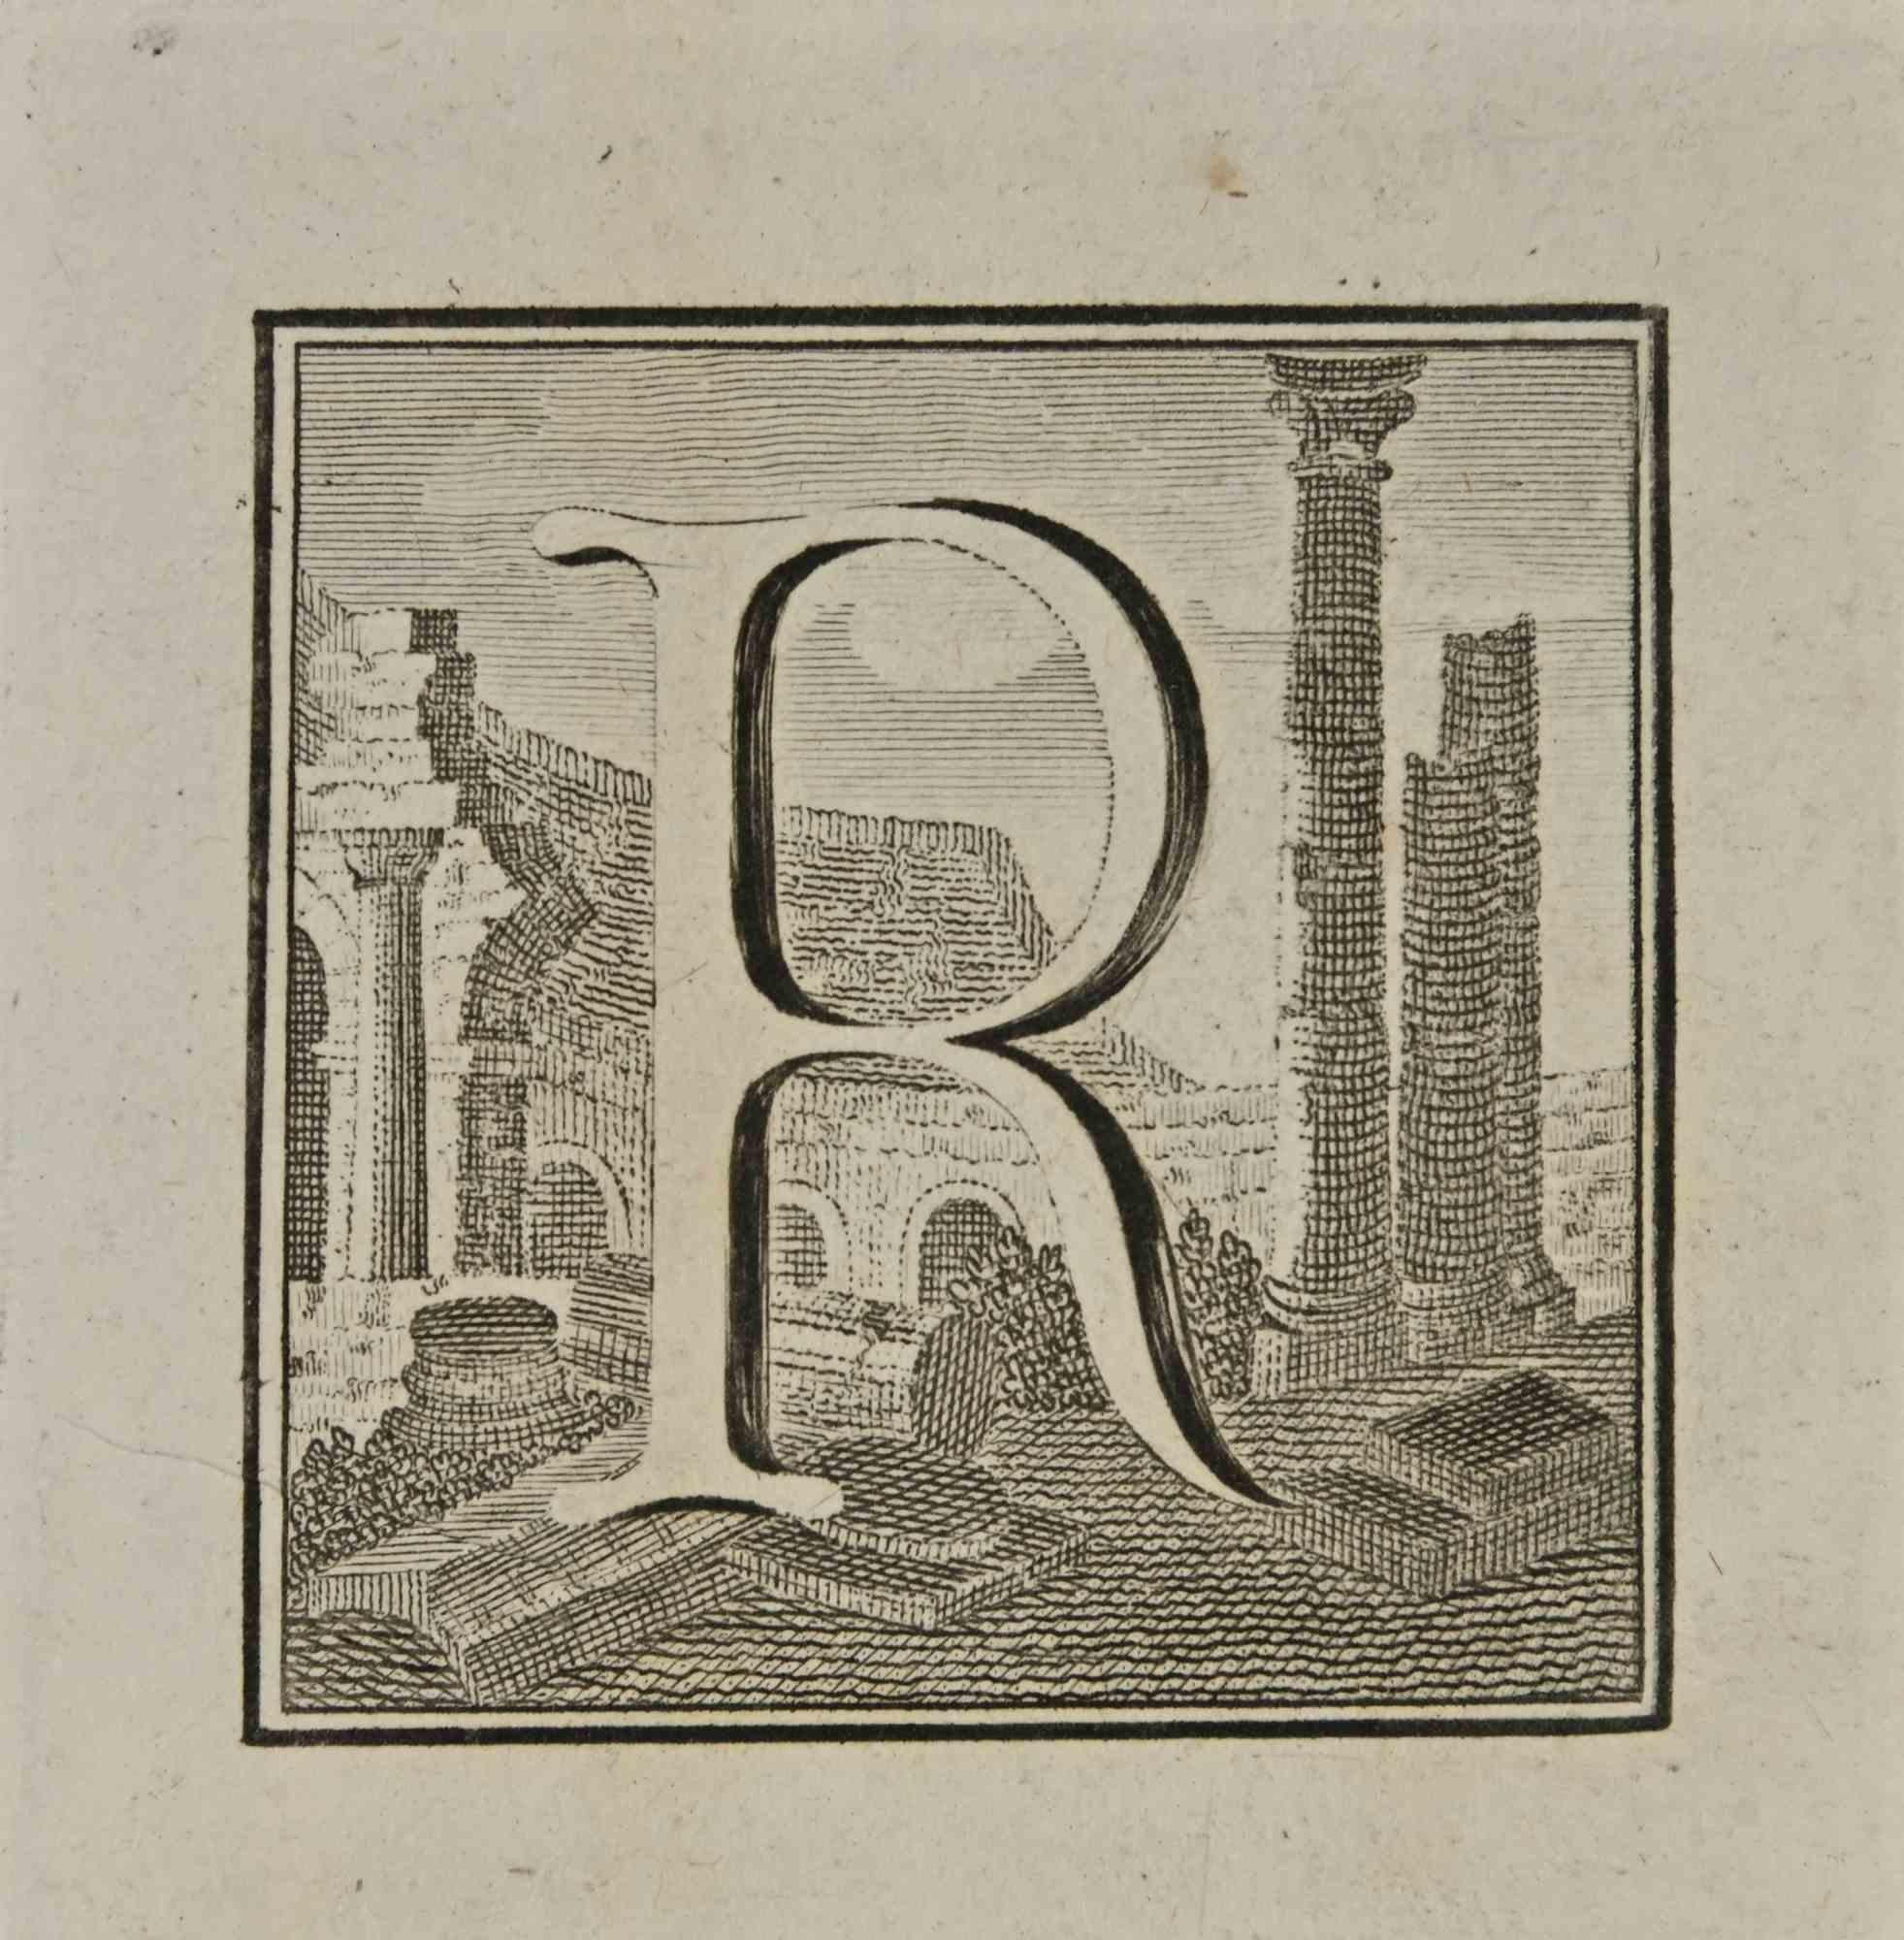 Letter of the Alphabet R from the series "Antiquities of Herculaneum", is an etching on paper realized by Luigi Vanvitelli in the 18th century.

Good conditions with some foxing.

The etching belongs to the print suite “Antiquities of Herculaneum